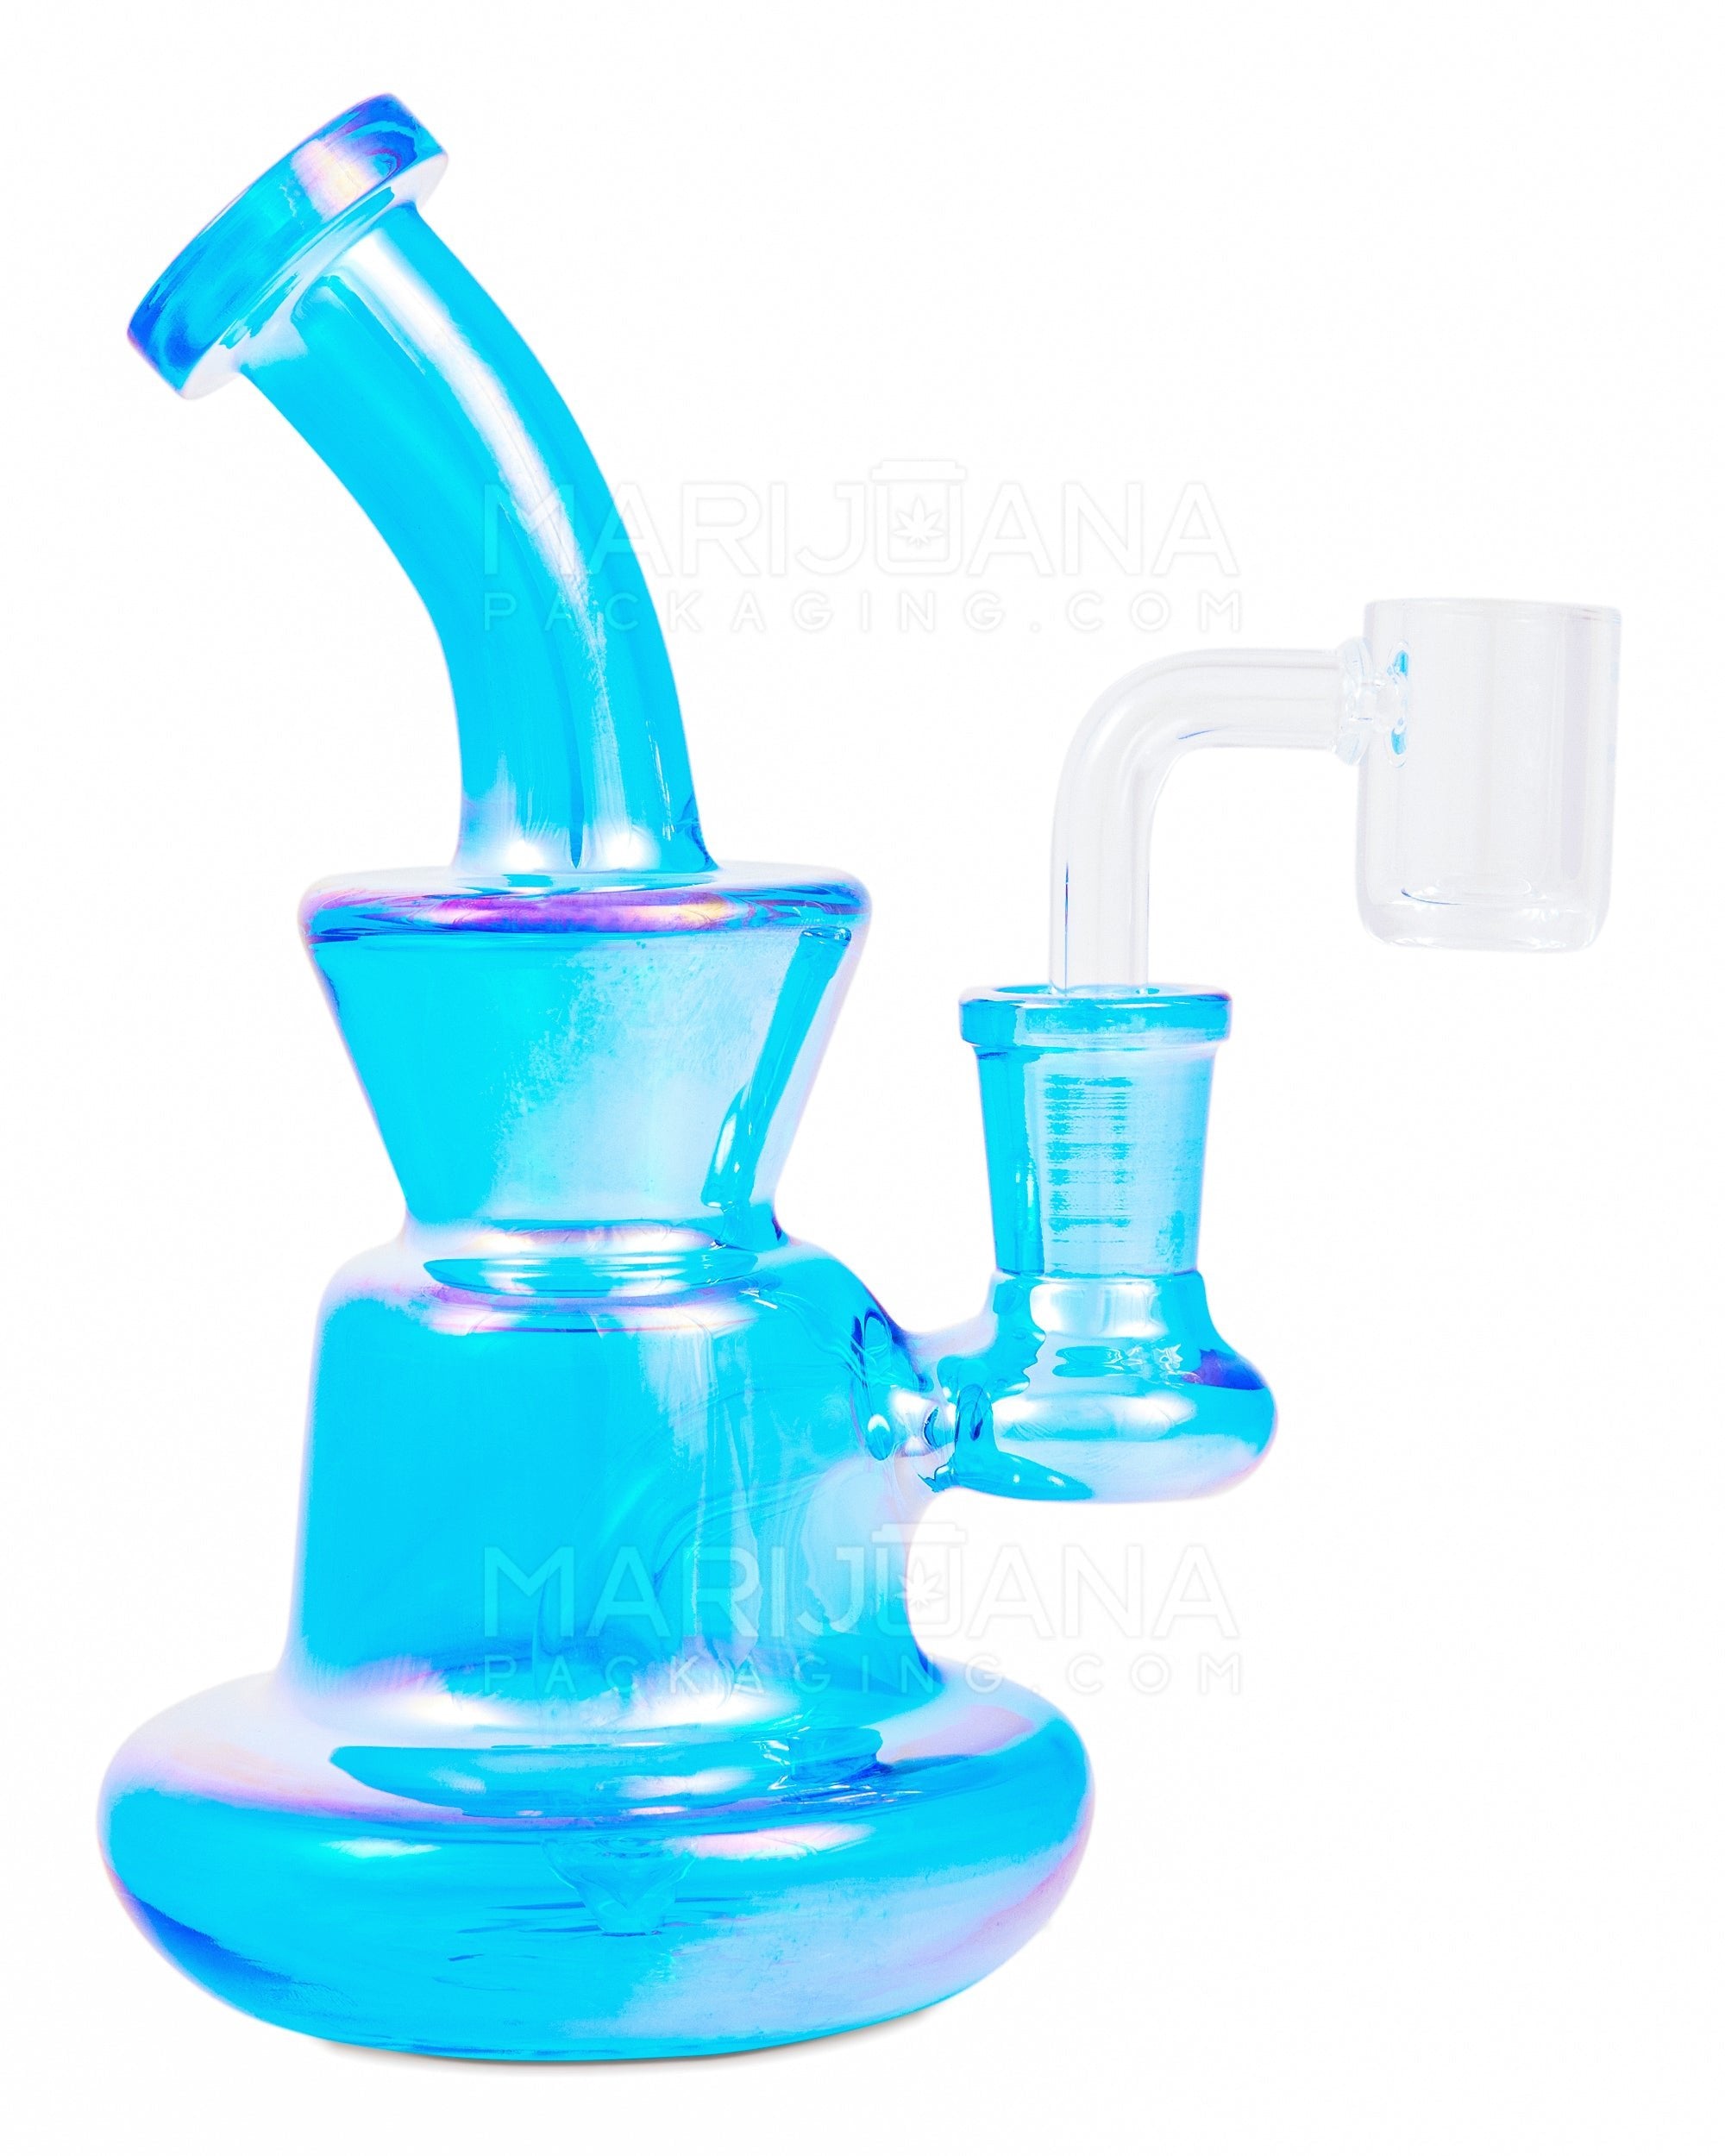 Bent Neck Iridescent Glass Dab Rig w/ Wide Base | 6in Tall - 14mm Banger - Blue - 1